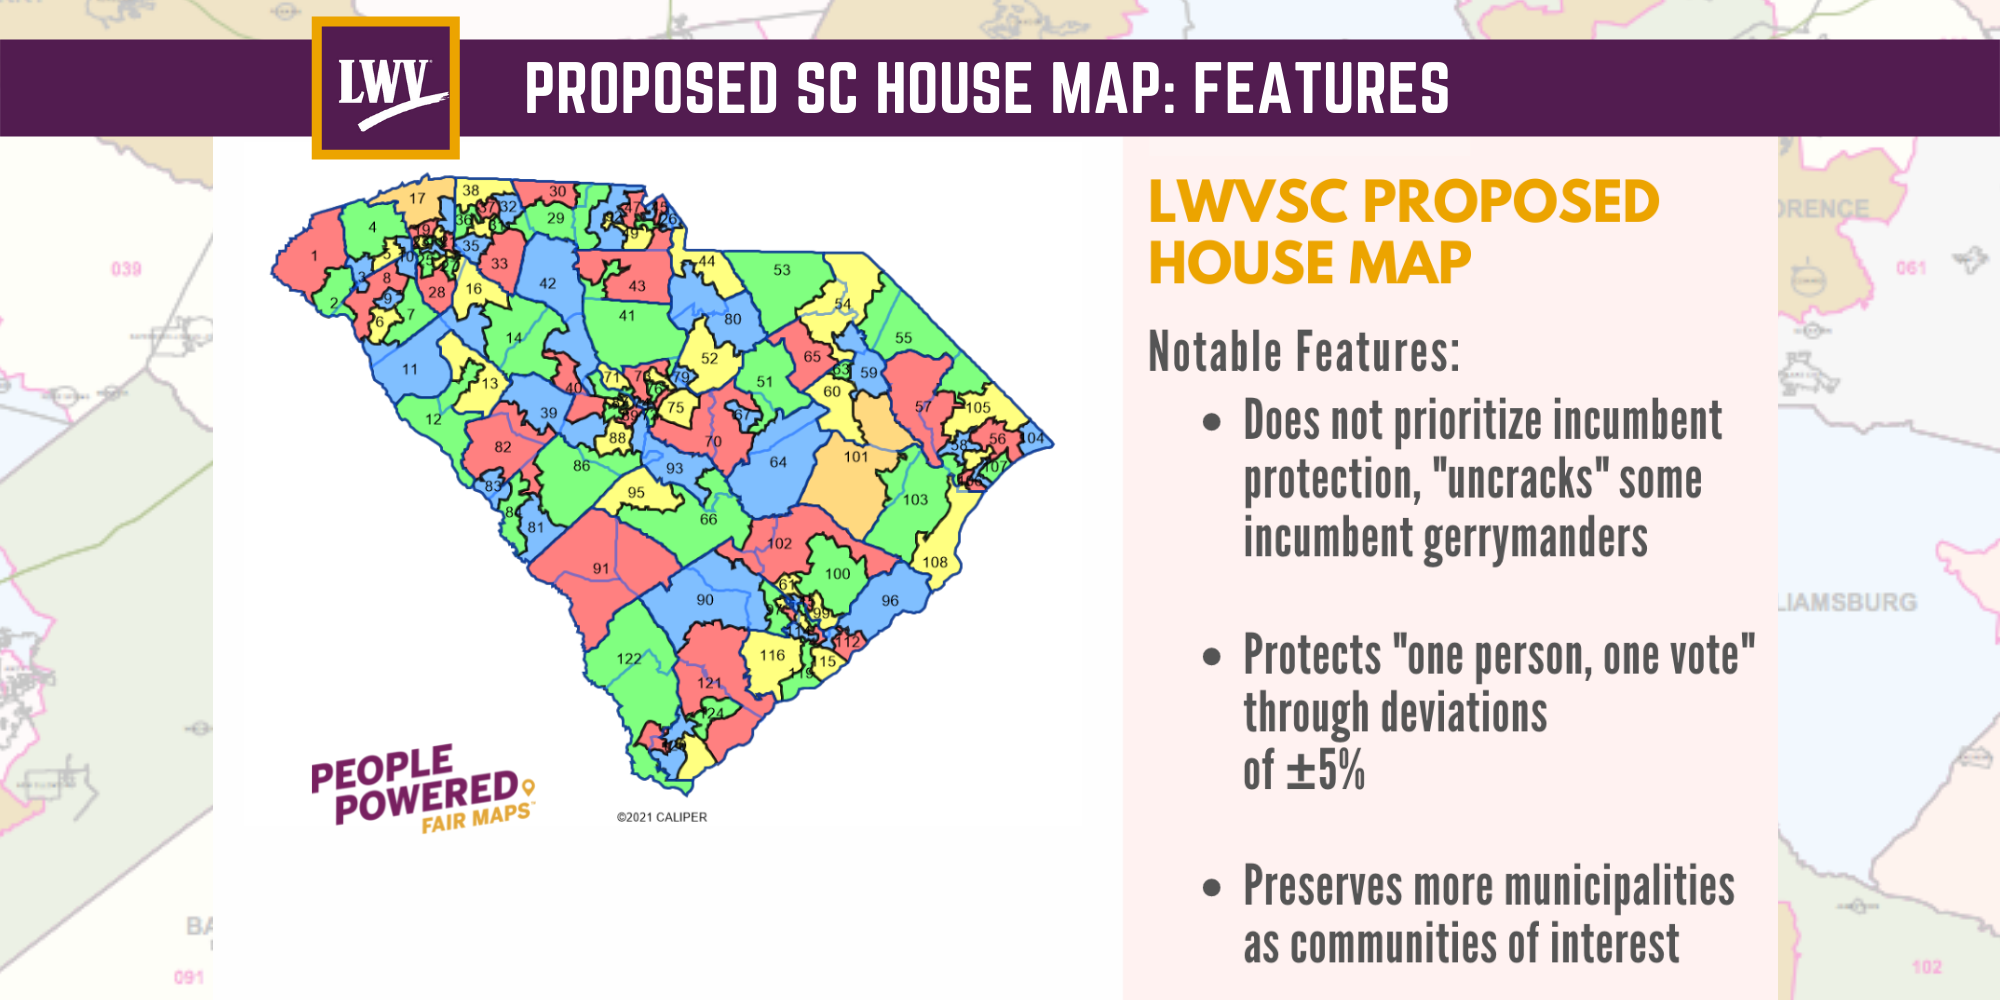 LWVSC Proposed House Map: Features 